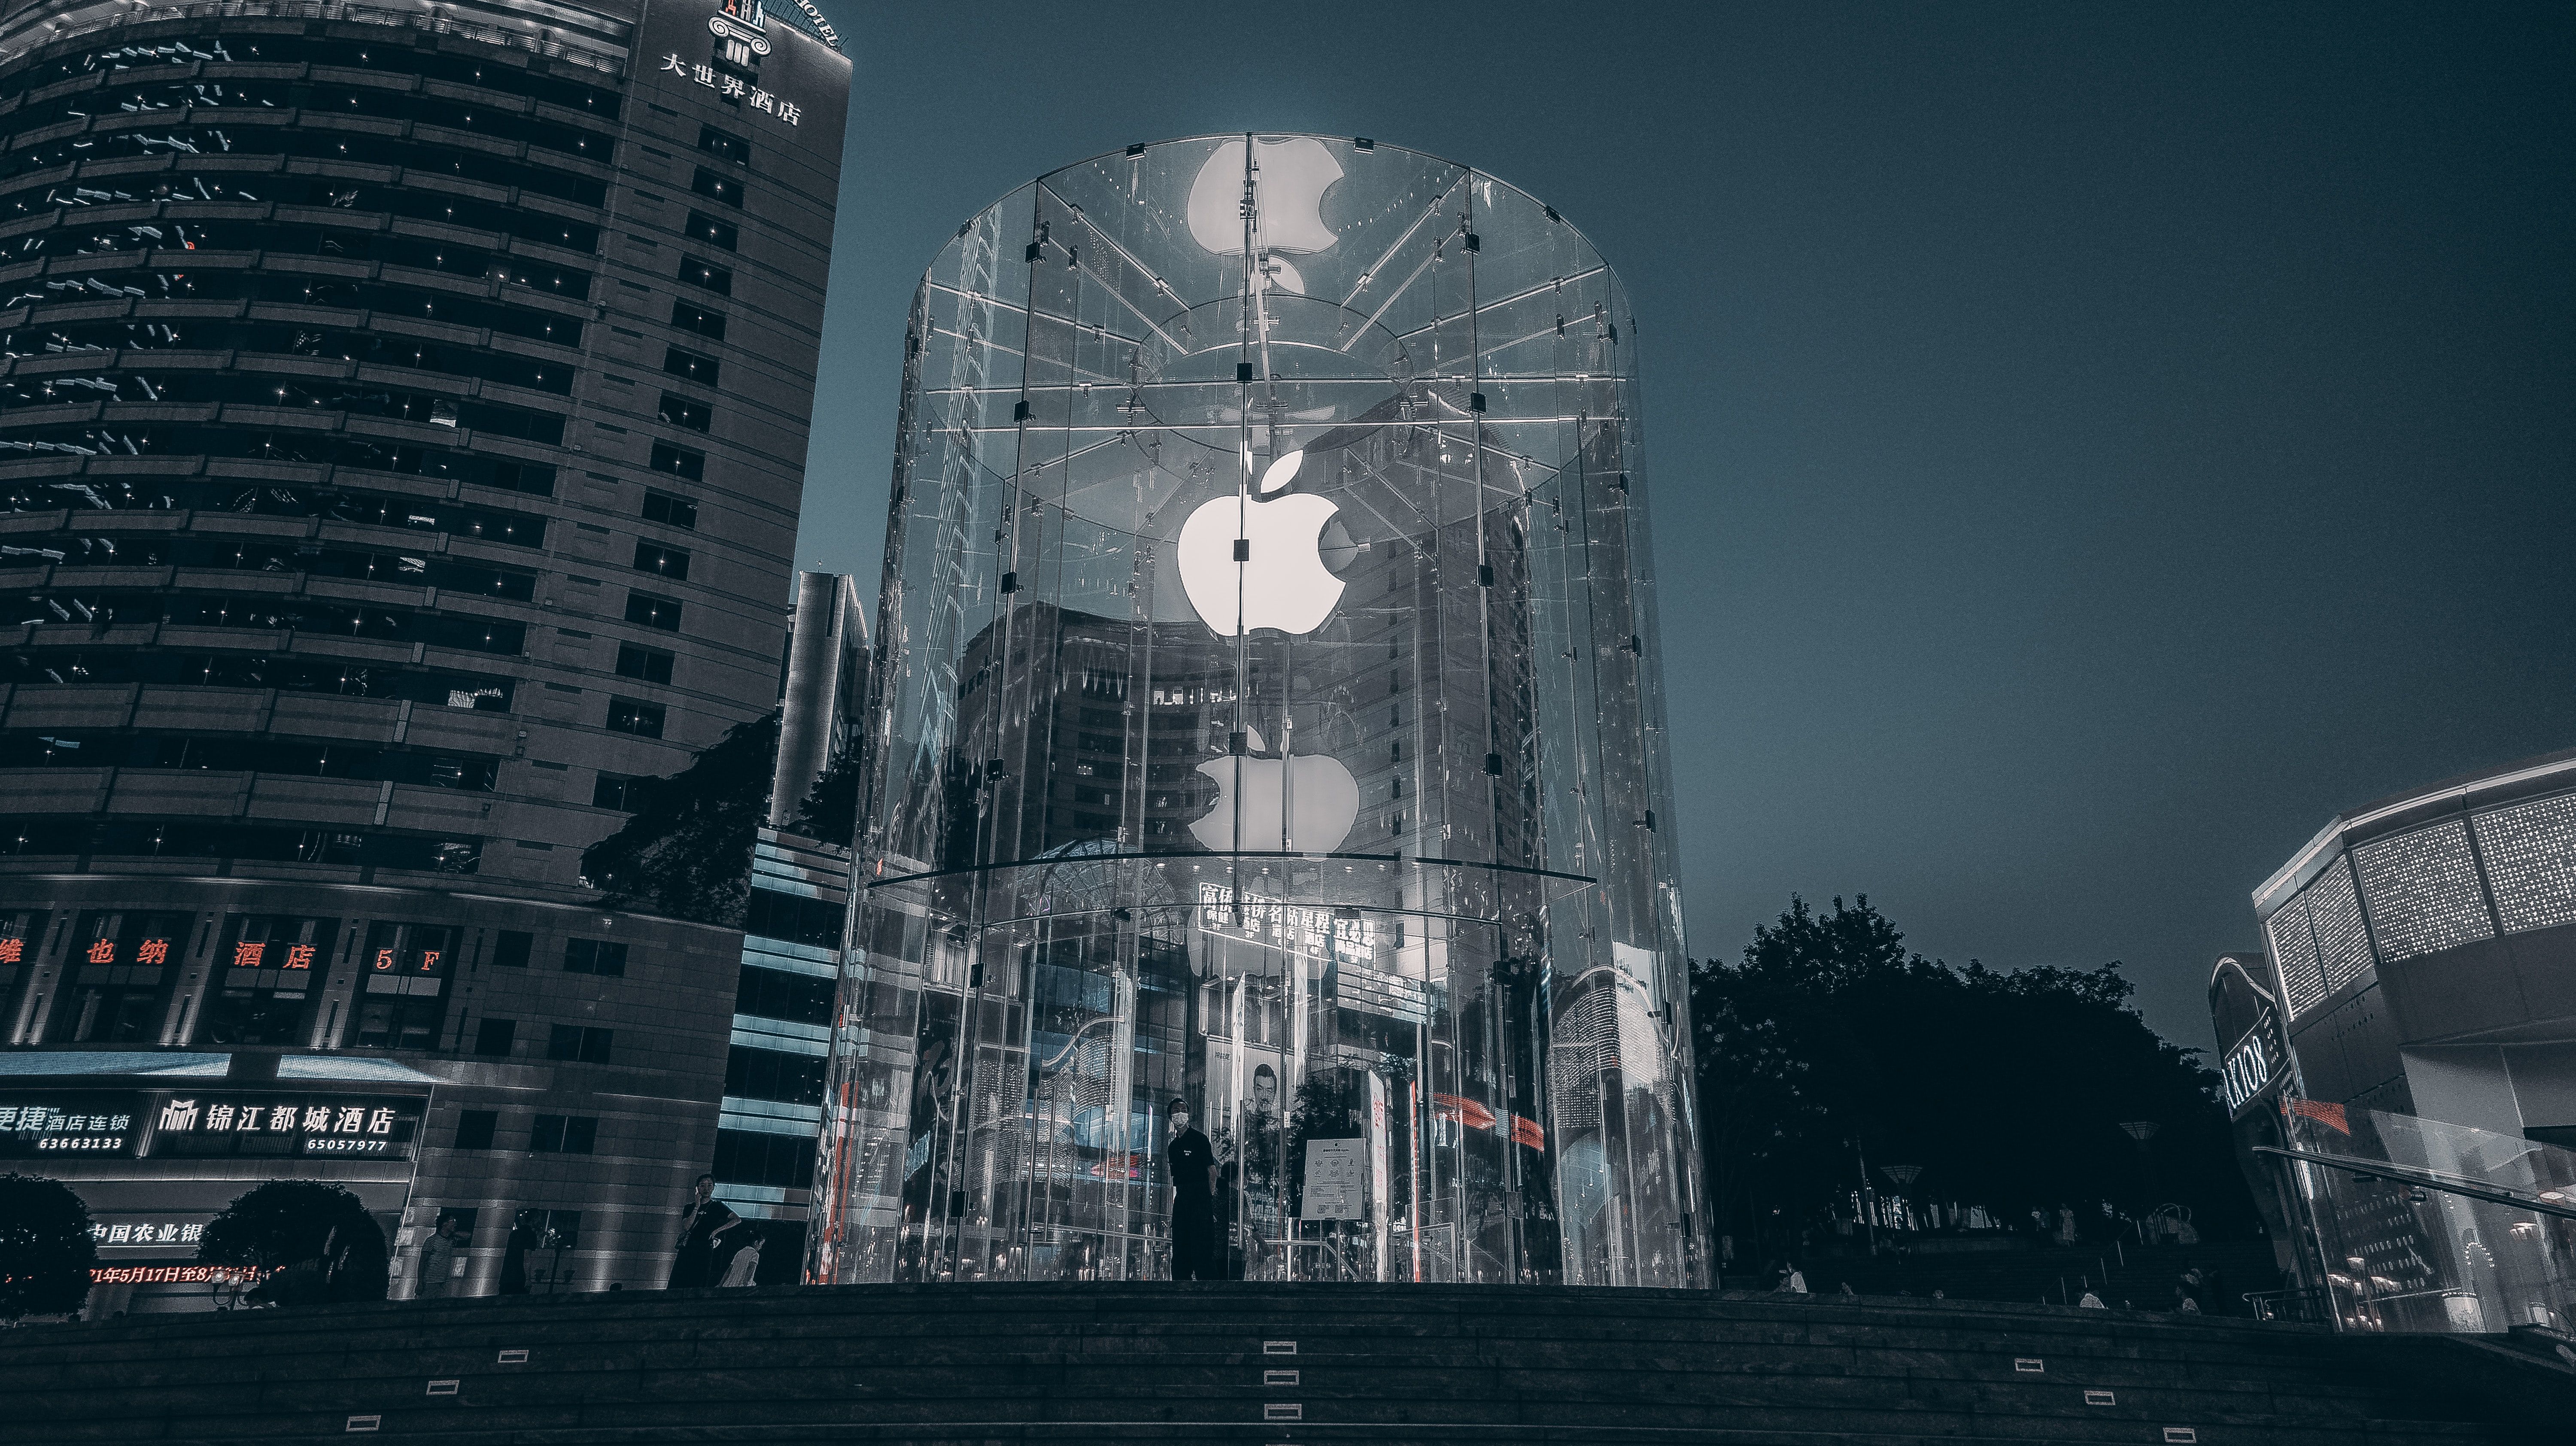 Photo of the Apple logo showing on the side of a building